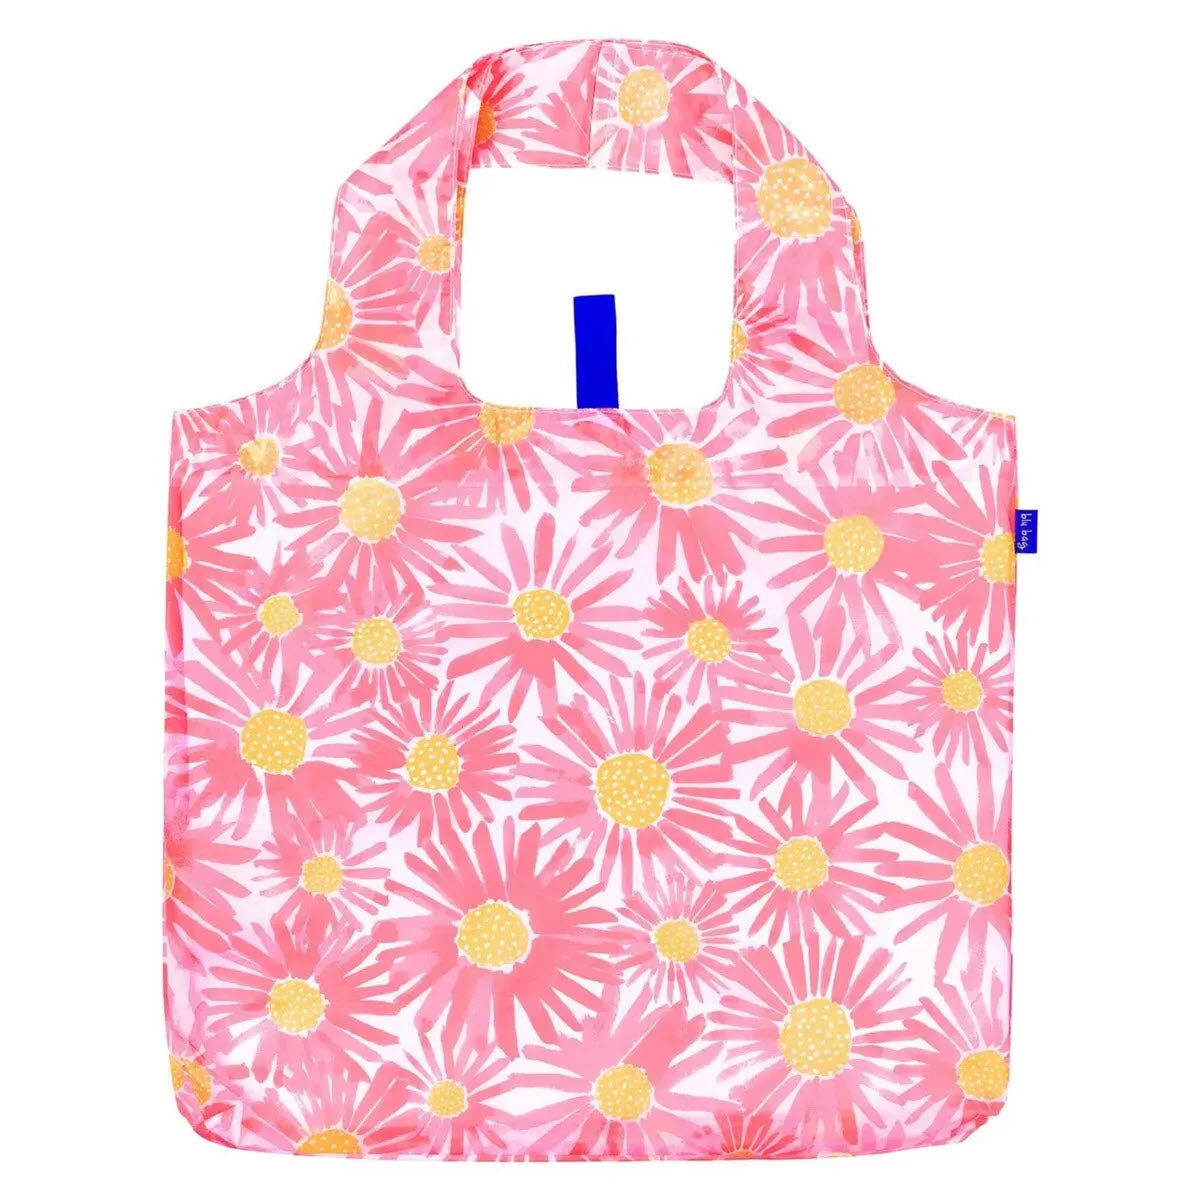 BLU BAG DAISIES reusable shopping bag from Rockflowerpaper with a pink and yellow floral pattern, featuring integrated handles and an eco-friendly tote design with a blue brand tag on the side.